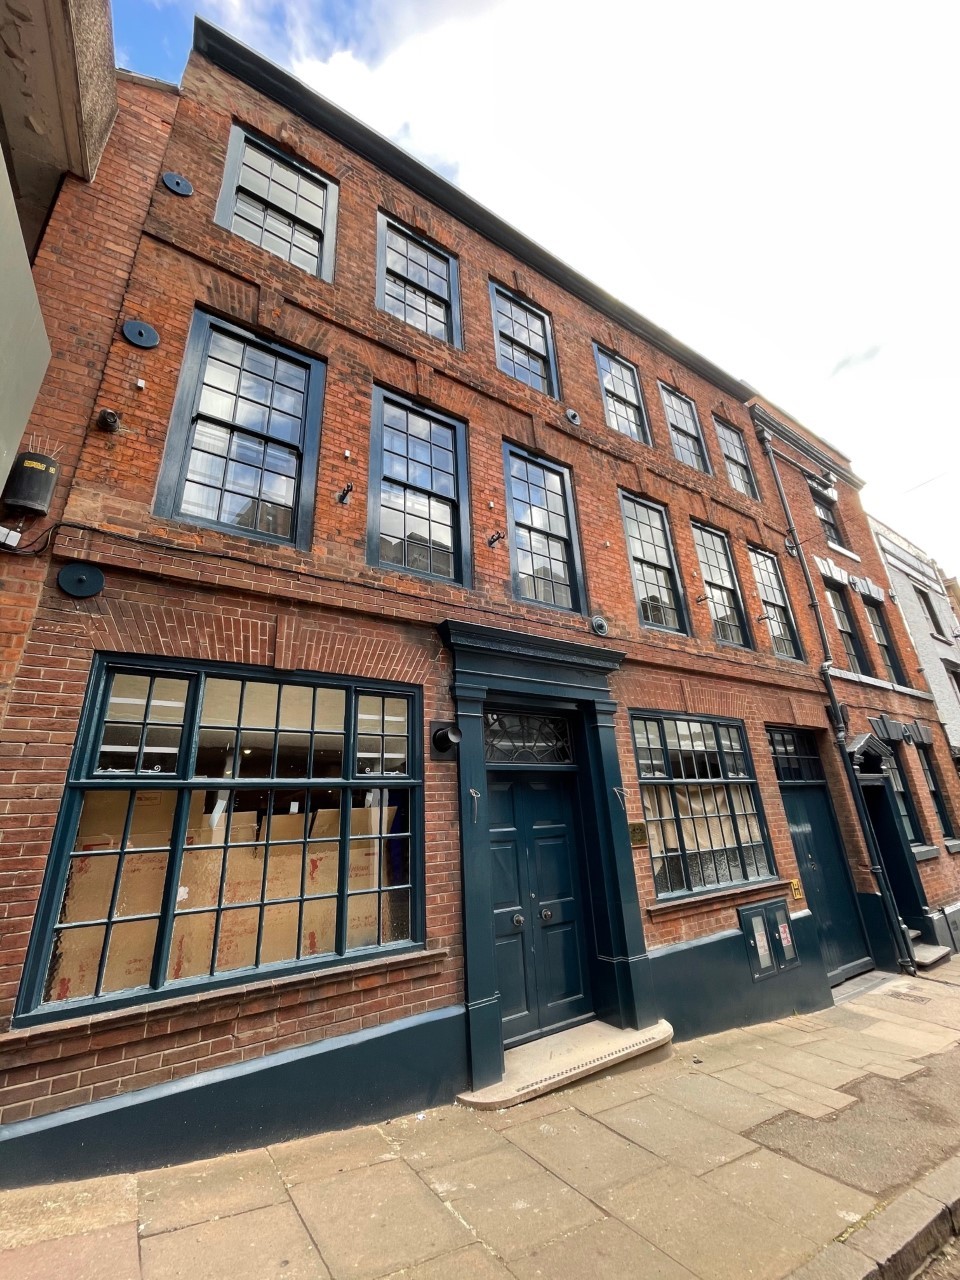 The Hotel, Newgate Street, Chester, is to open soon.